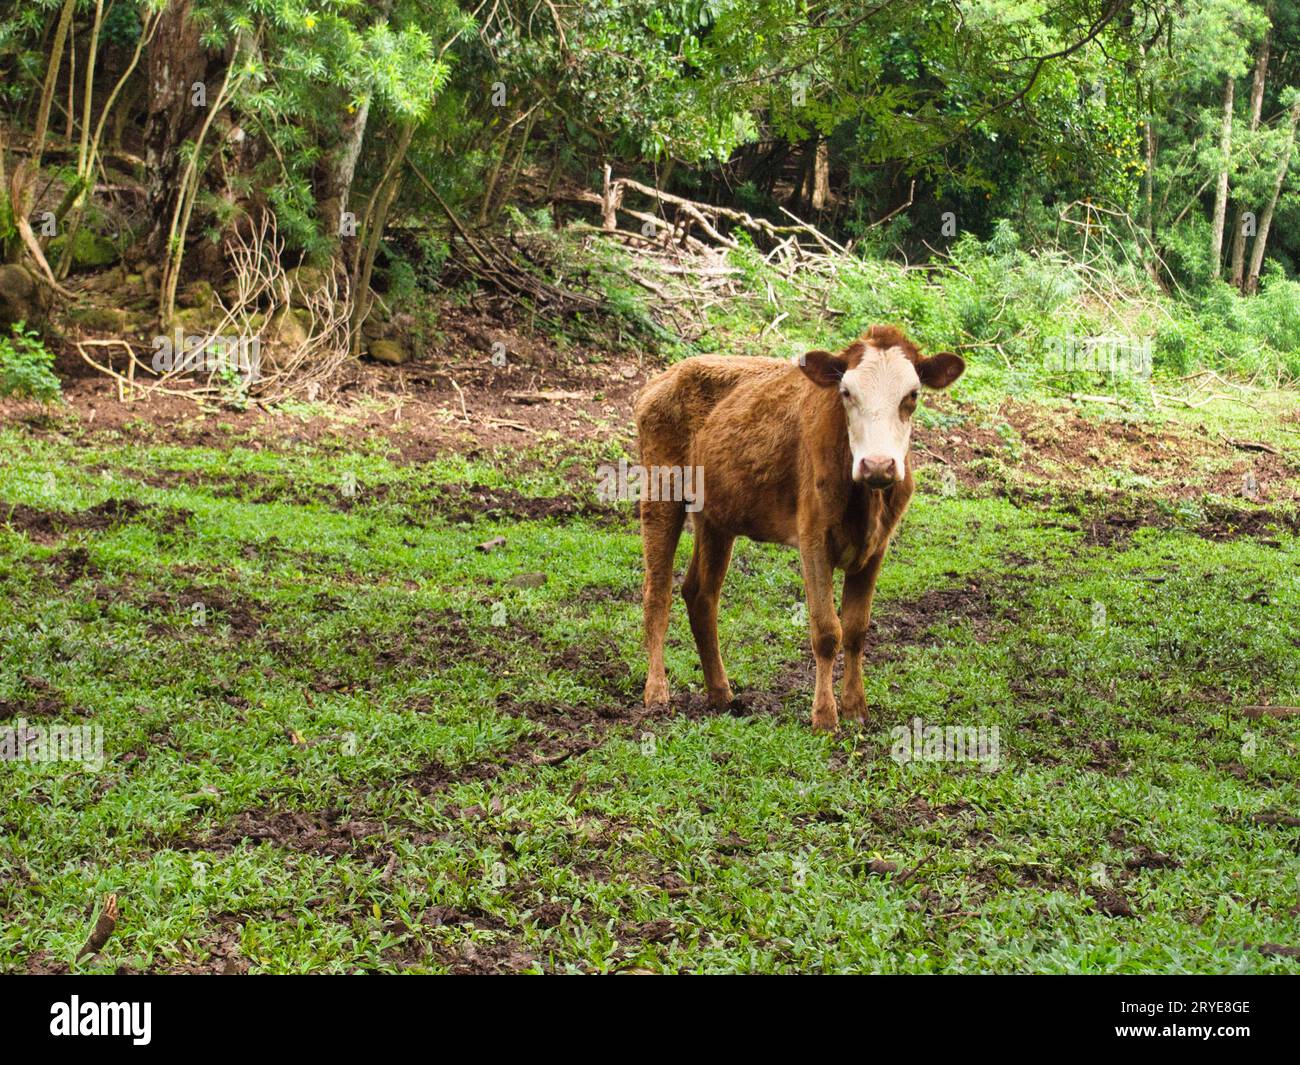 Brown young cow with white face in field in tropical botanical garden in Kauai, Hawaii. Stock Photo